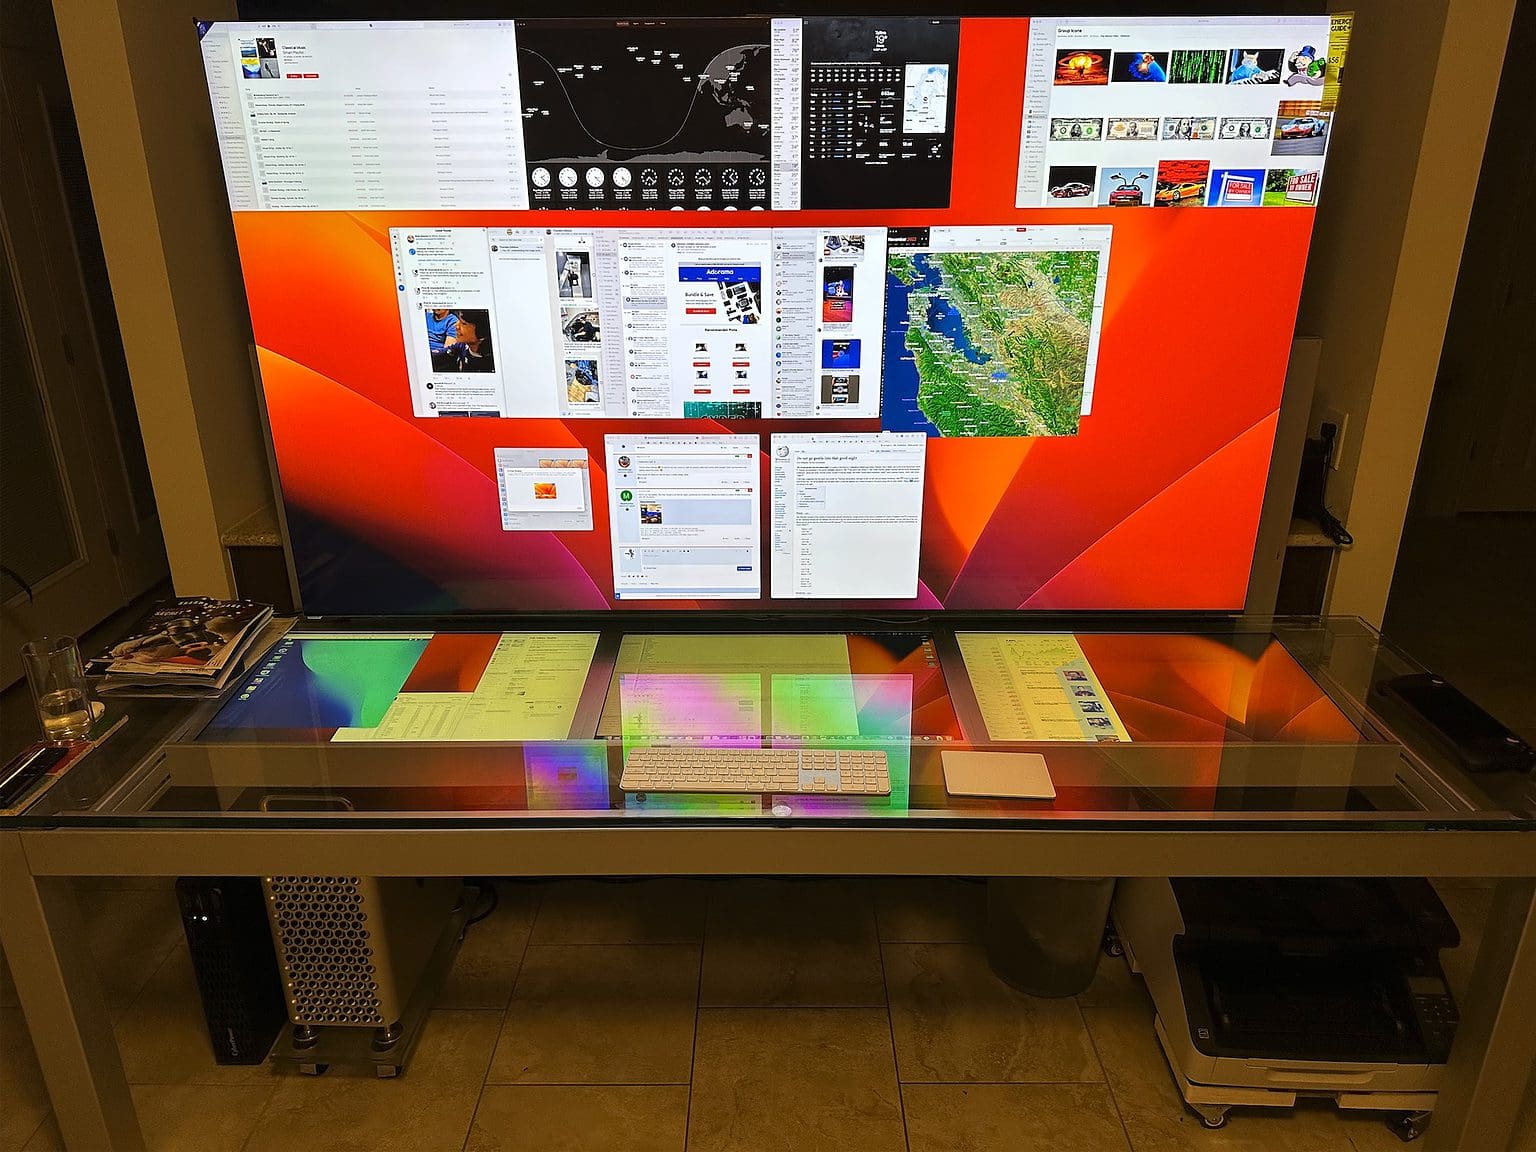 This custom-made desk and screen setup is mind-boggling.